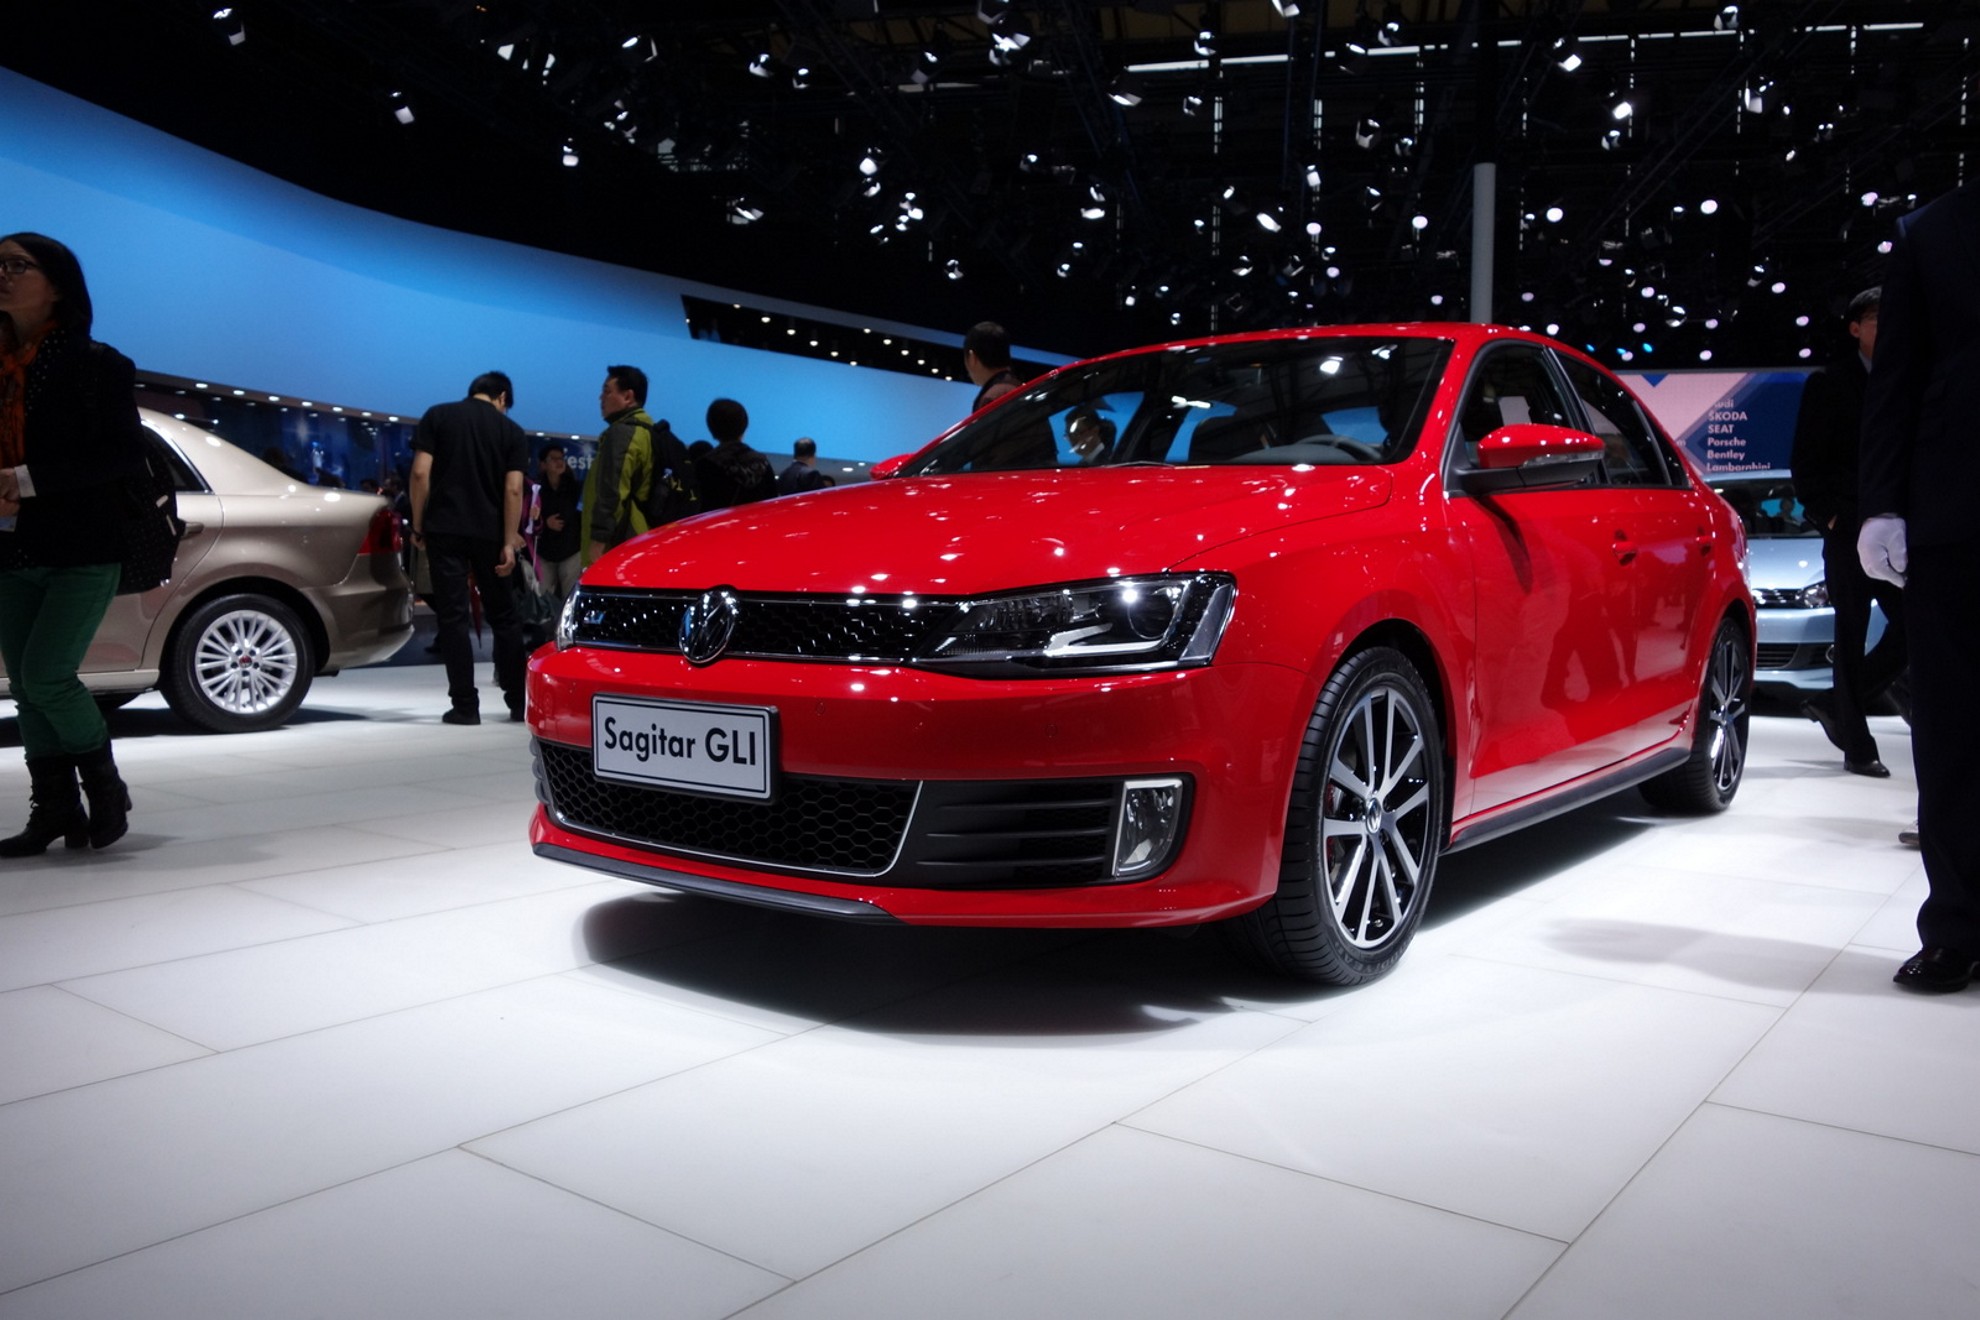 Images: Volkswagen at the Shanghai Auto Show 2013